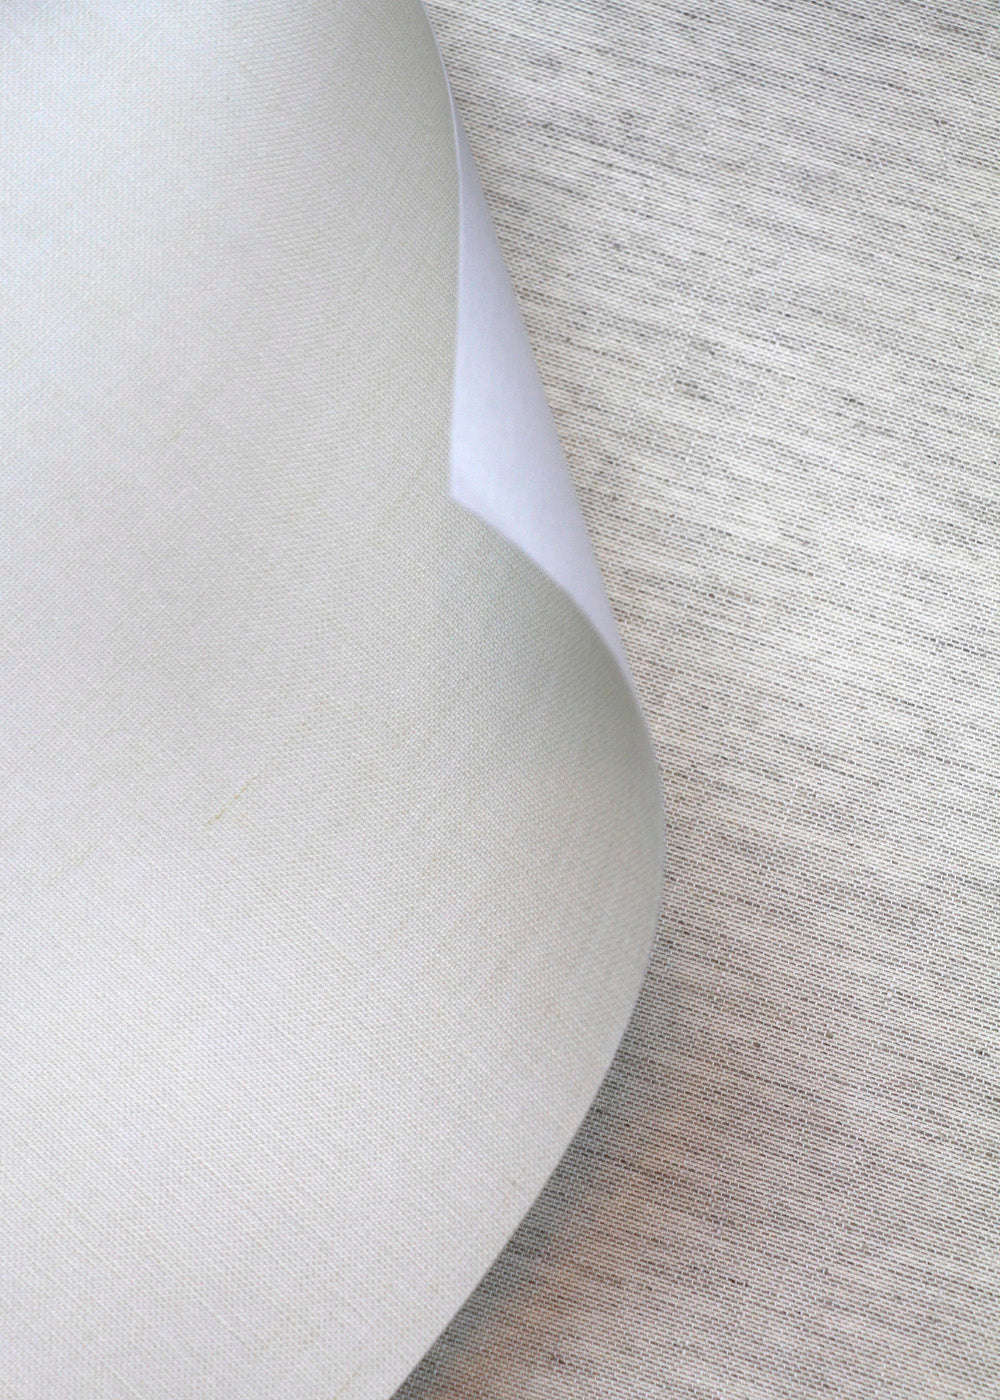 linen wallcovering shown in white and grey colors